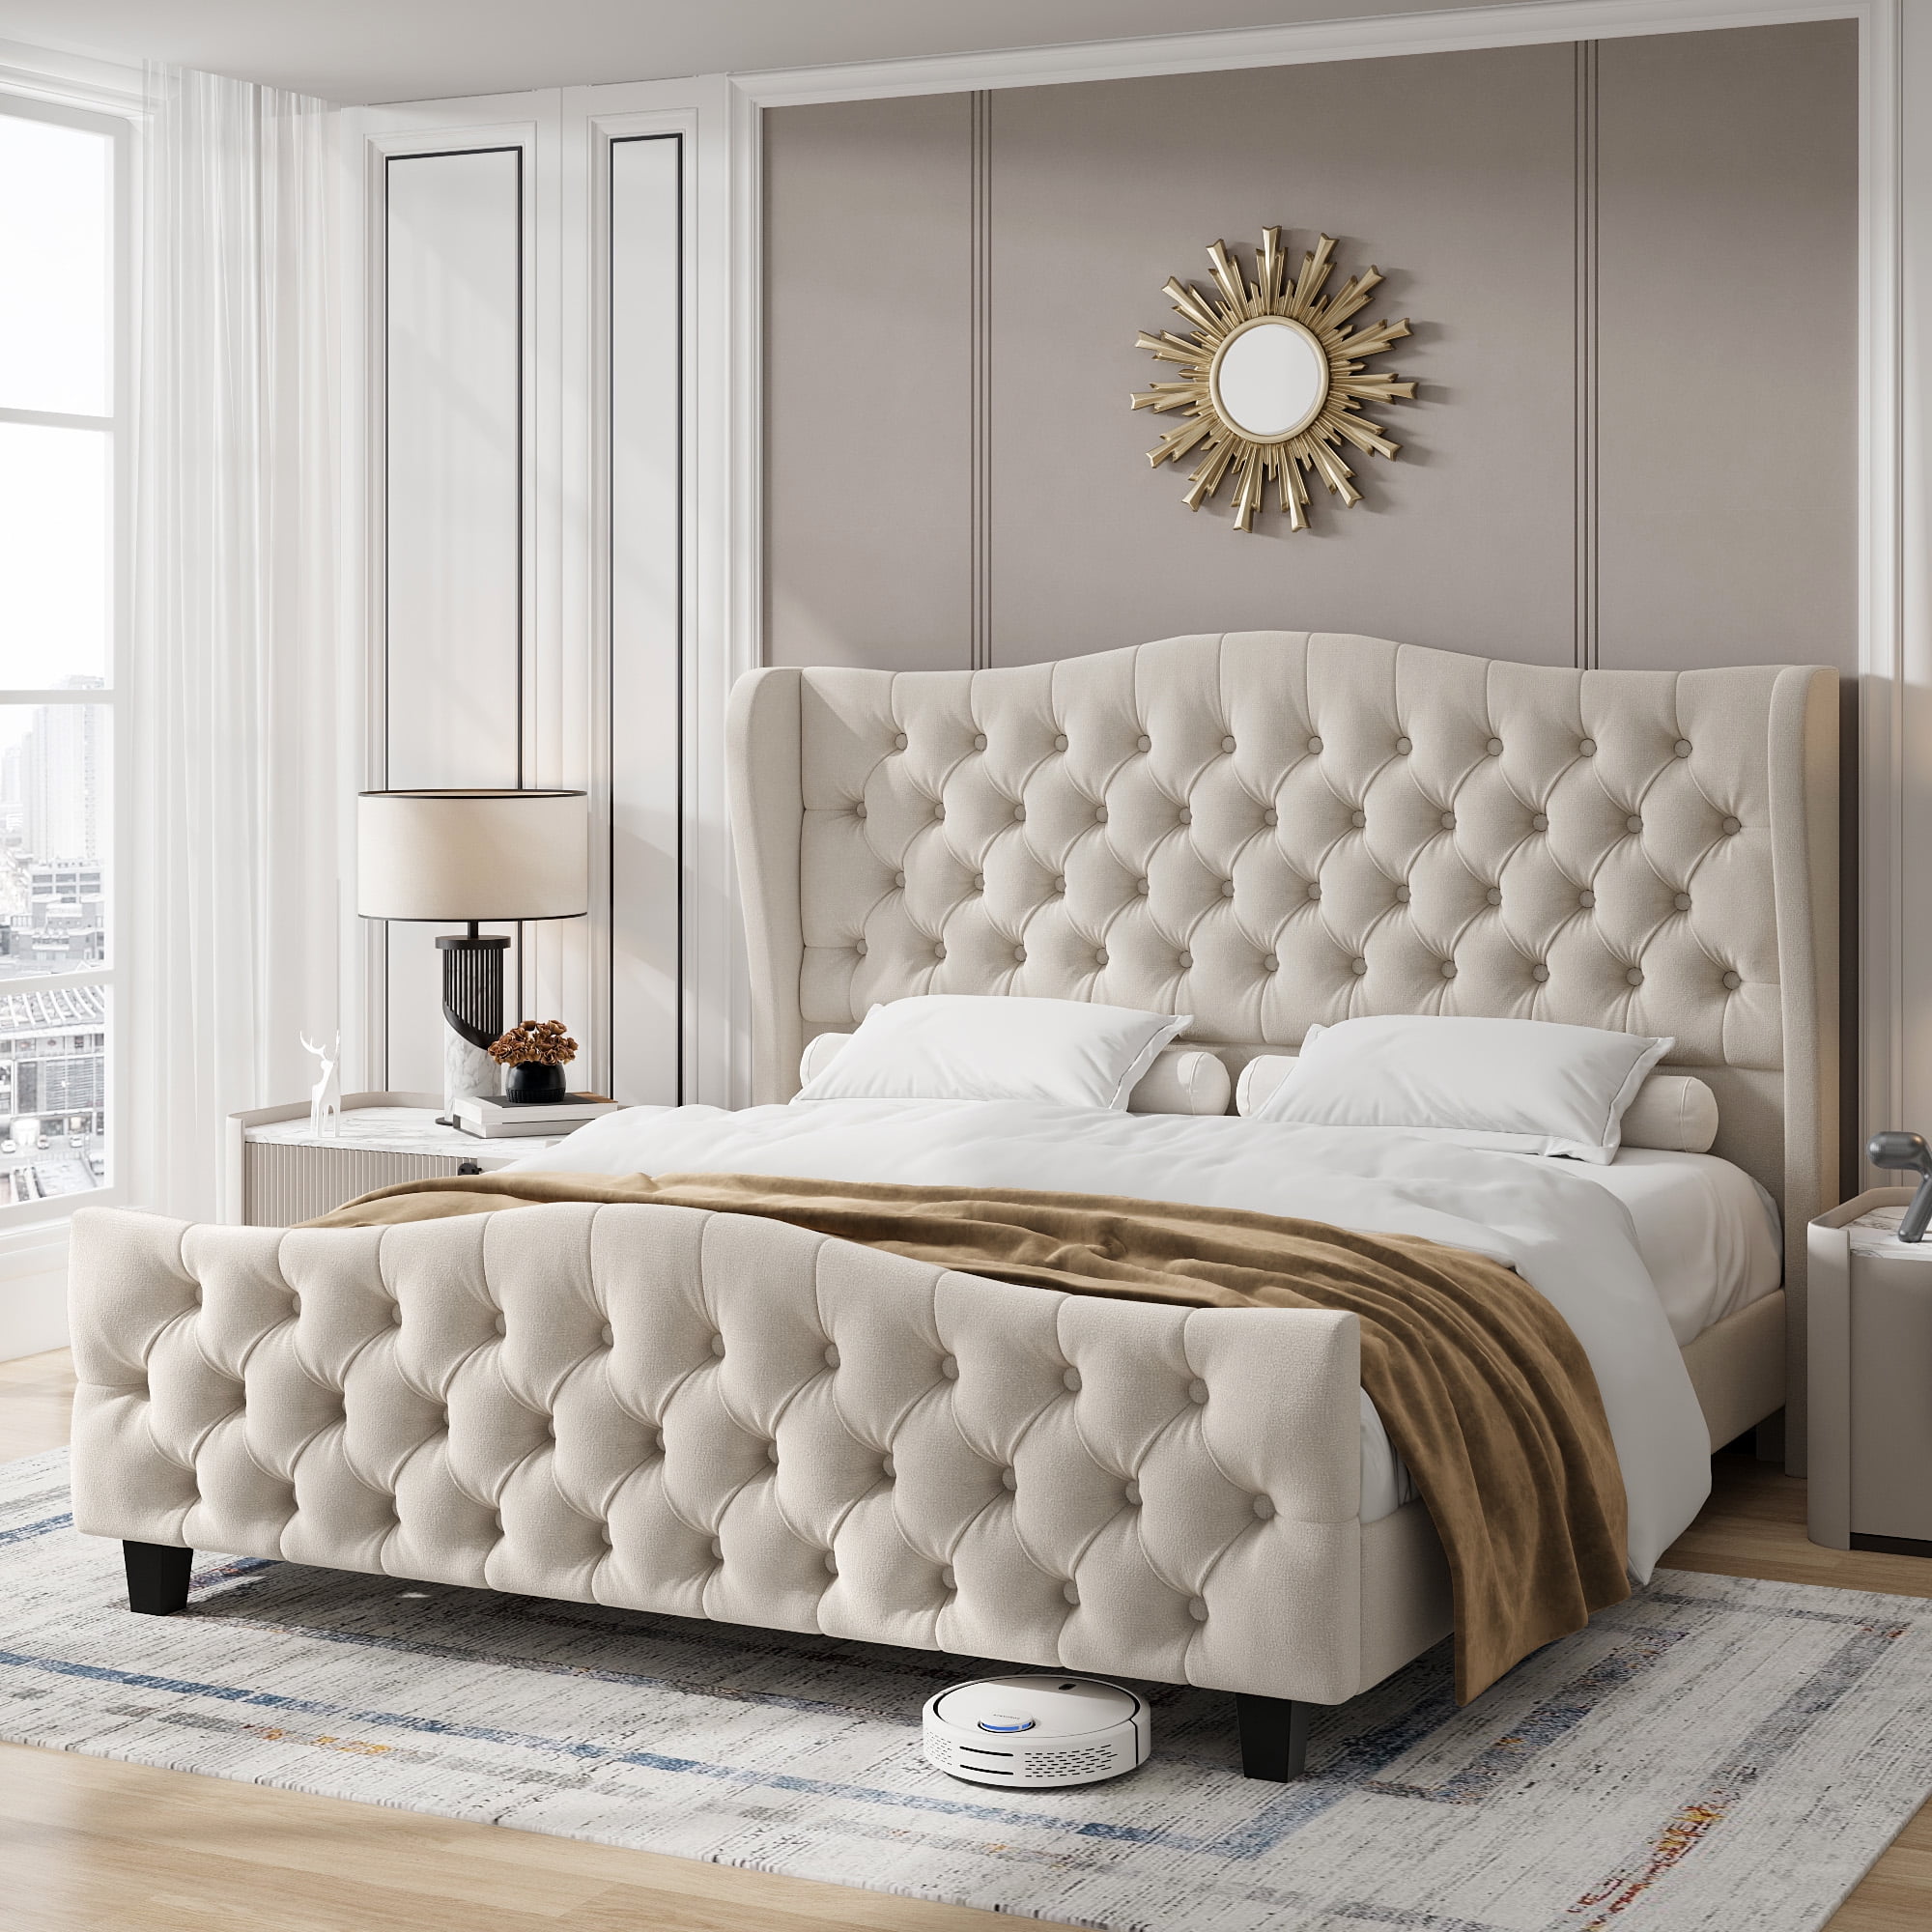 Magnificent Metal Accented Fabric Bed With Large Headboard